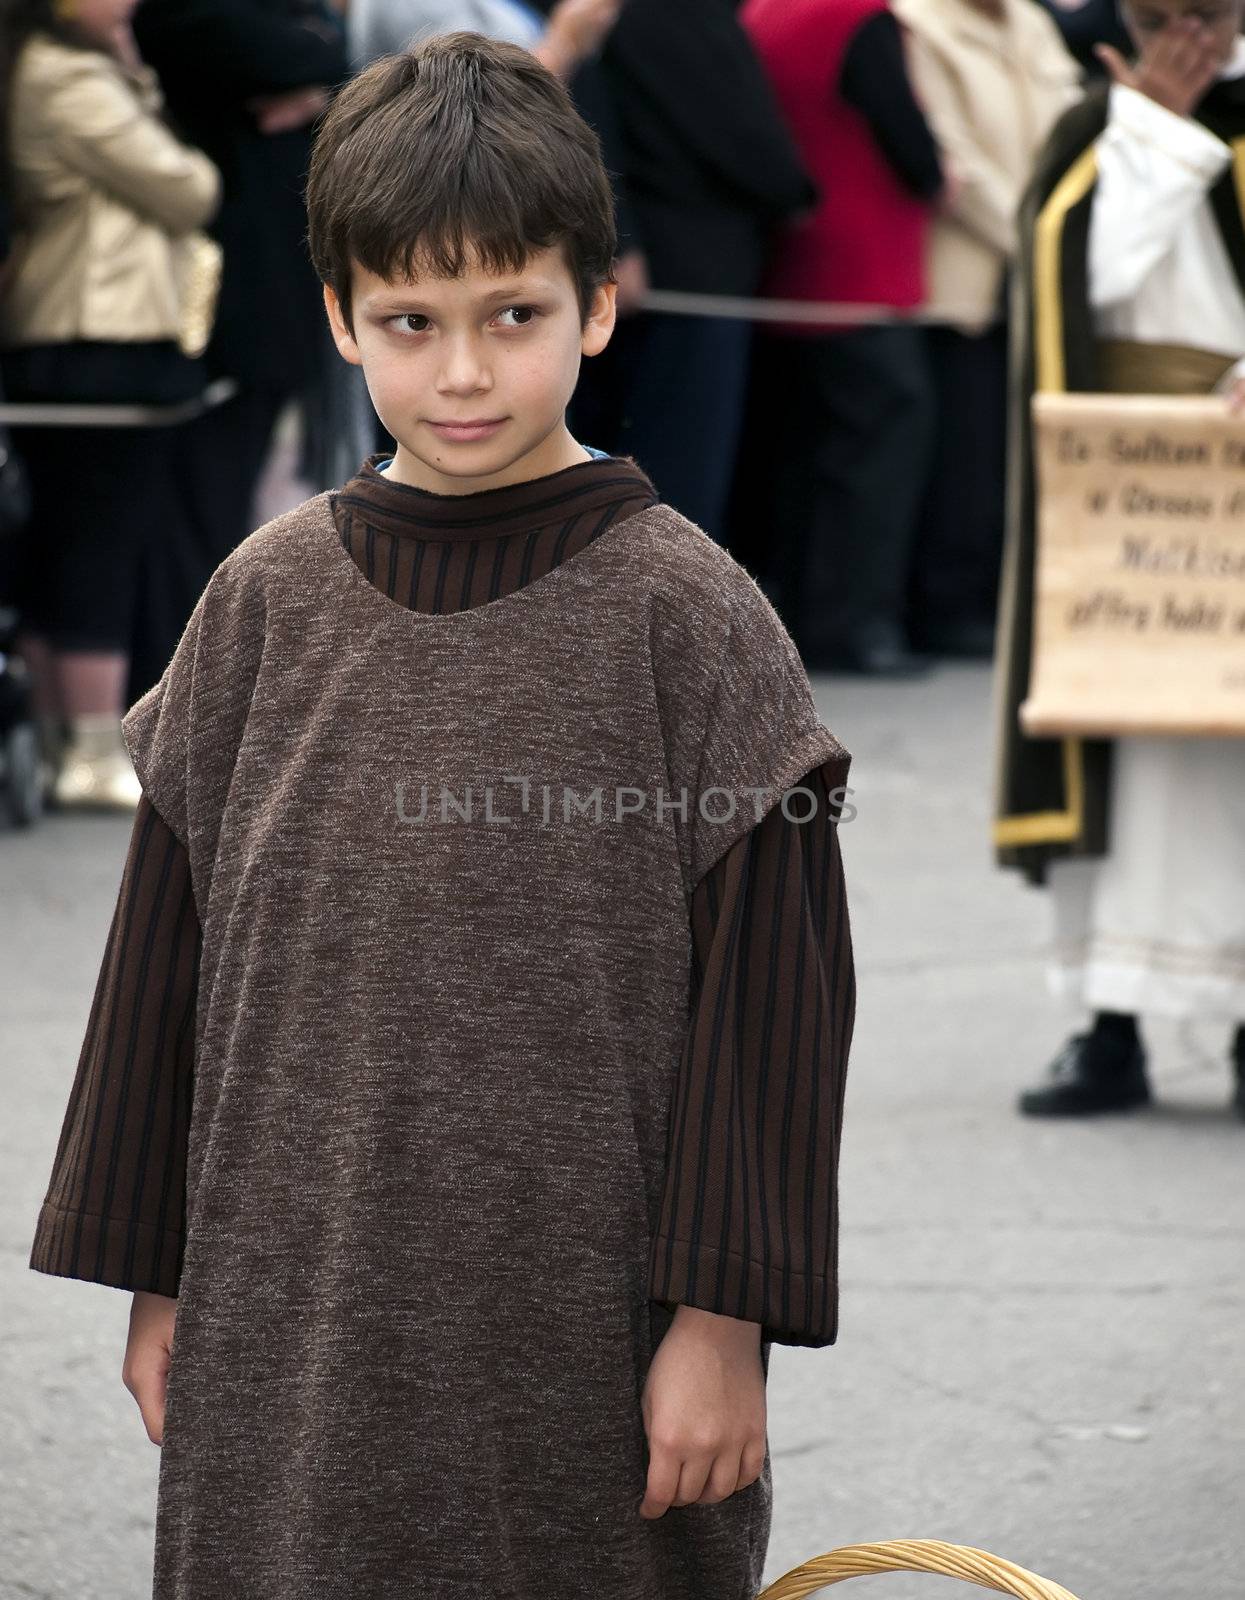 Good Friday Procession by PhotoWorks